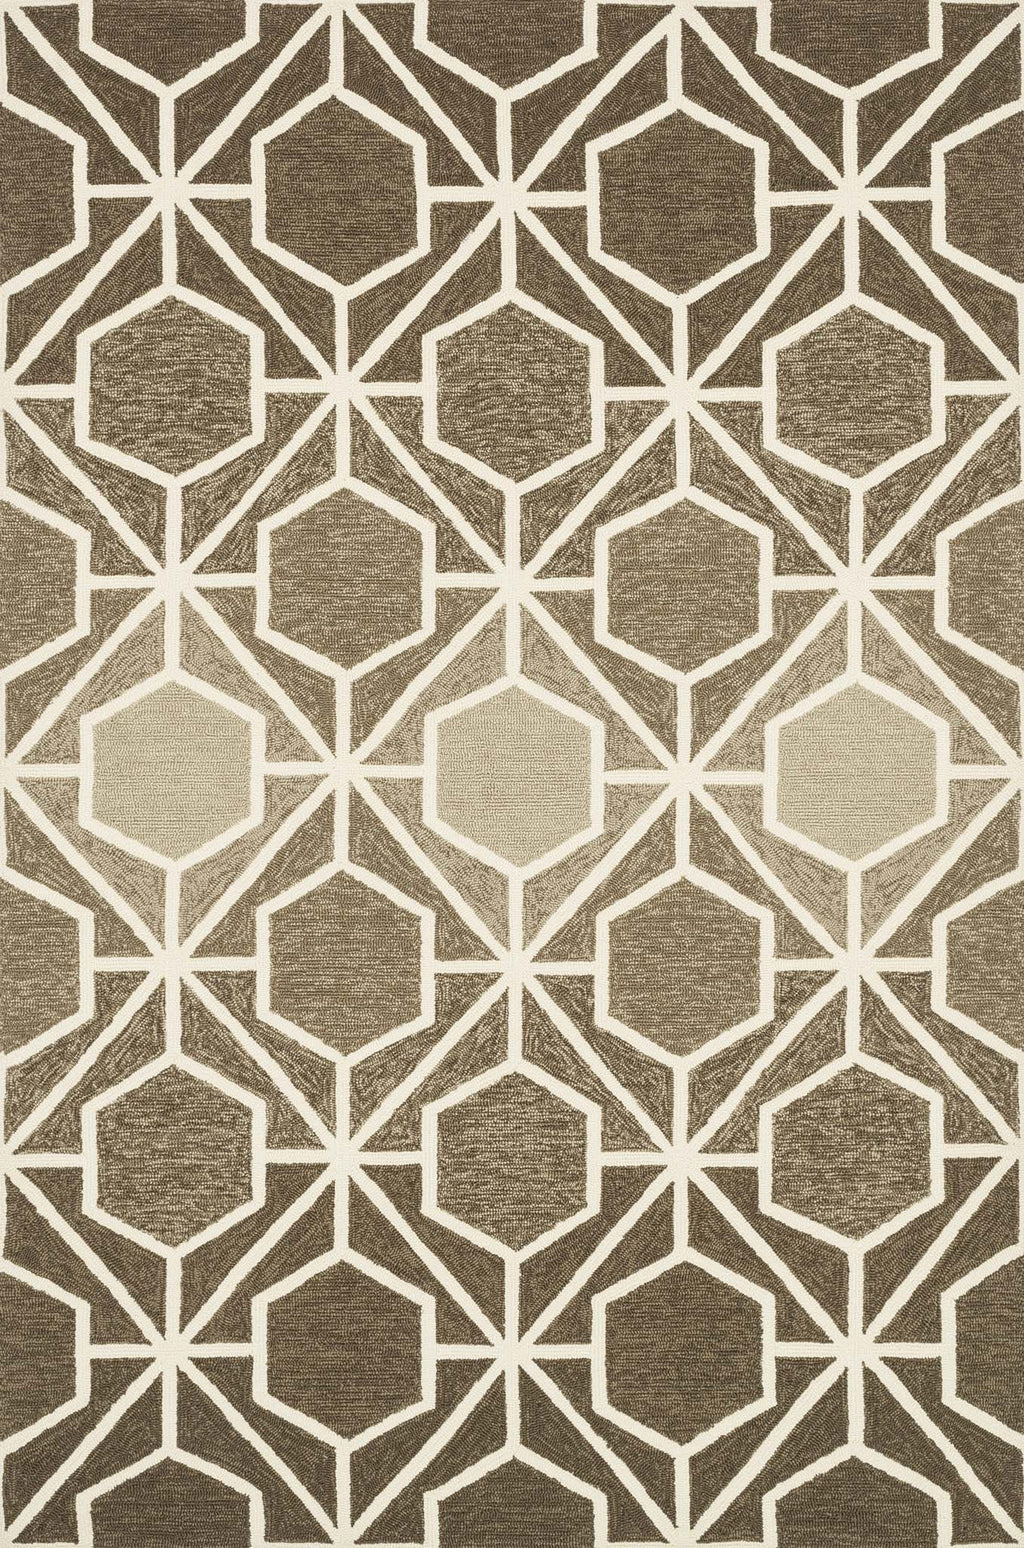 VENICE BEACH Collection Rug  in  BROWN / BEIGE Brown Small Hand-Hooked Polypropylene